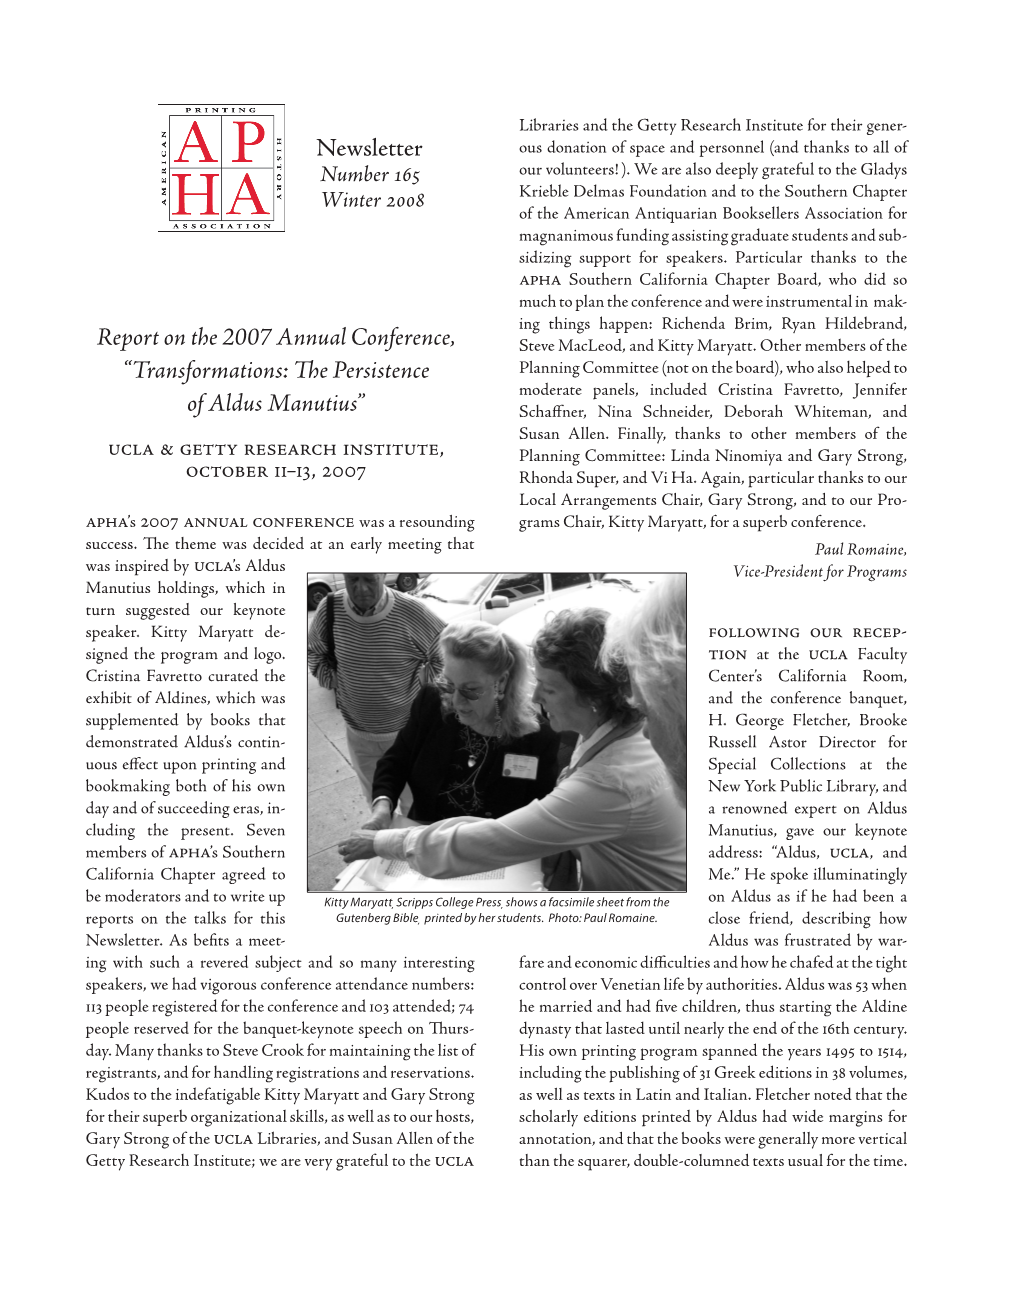 APHA Newsletter No. 165 (Winter 2008)